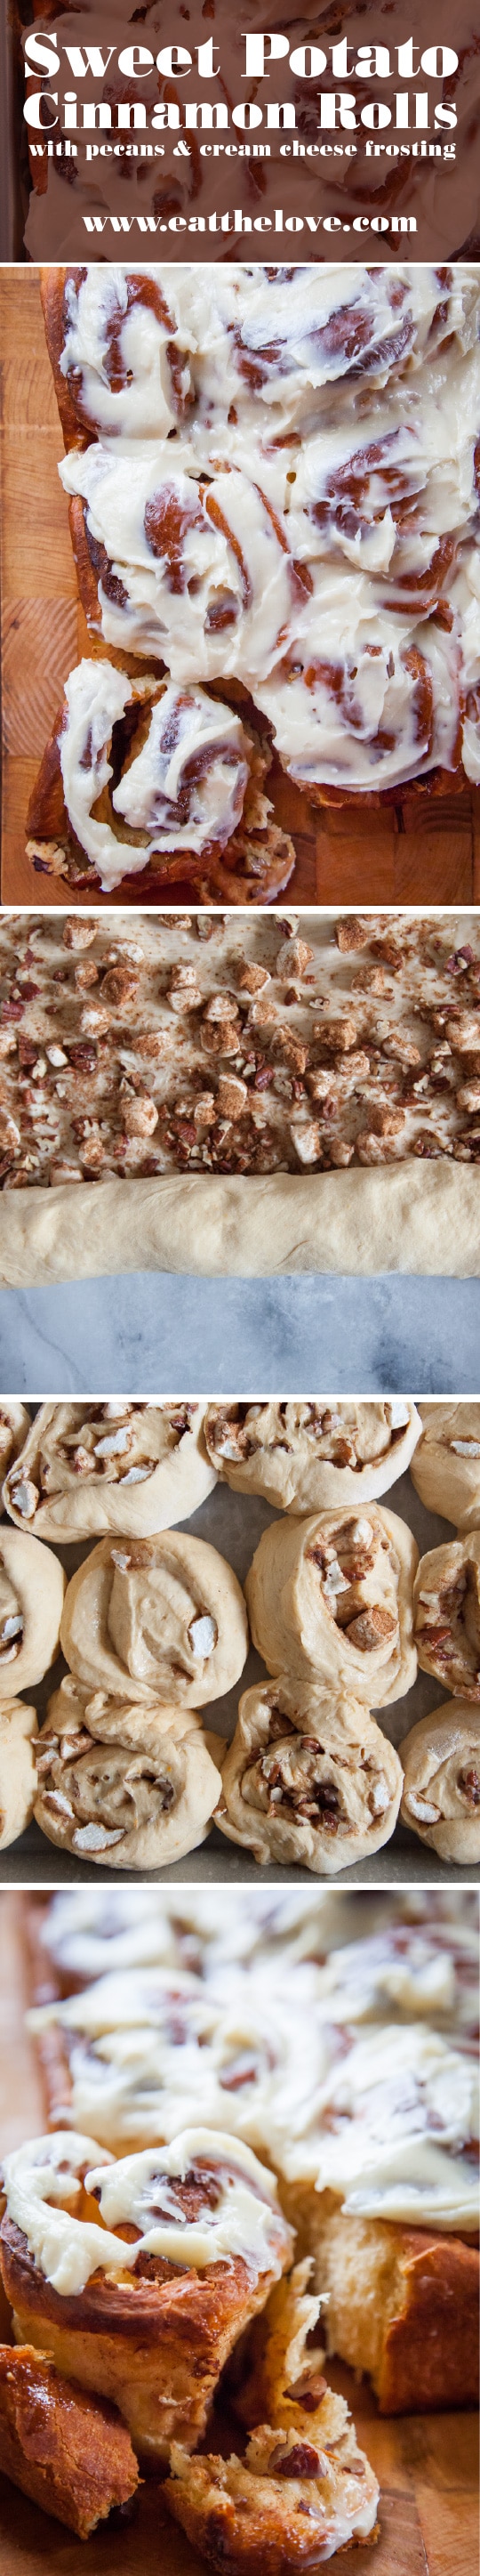 Sweet Potato Cinnamon Rolls with Pecans and Cream Cheese Frosting. Photo and recipe by Irvin Lin of Eat the Love.